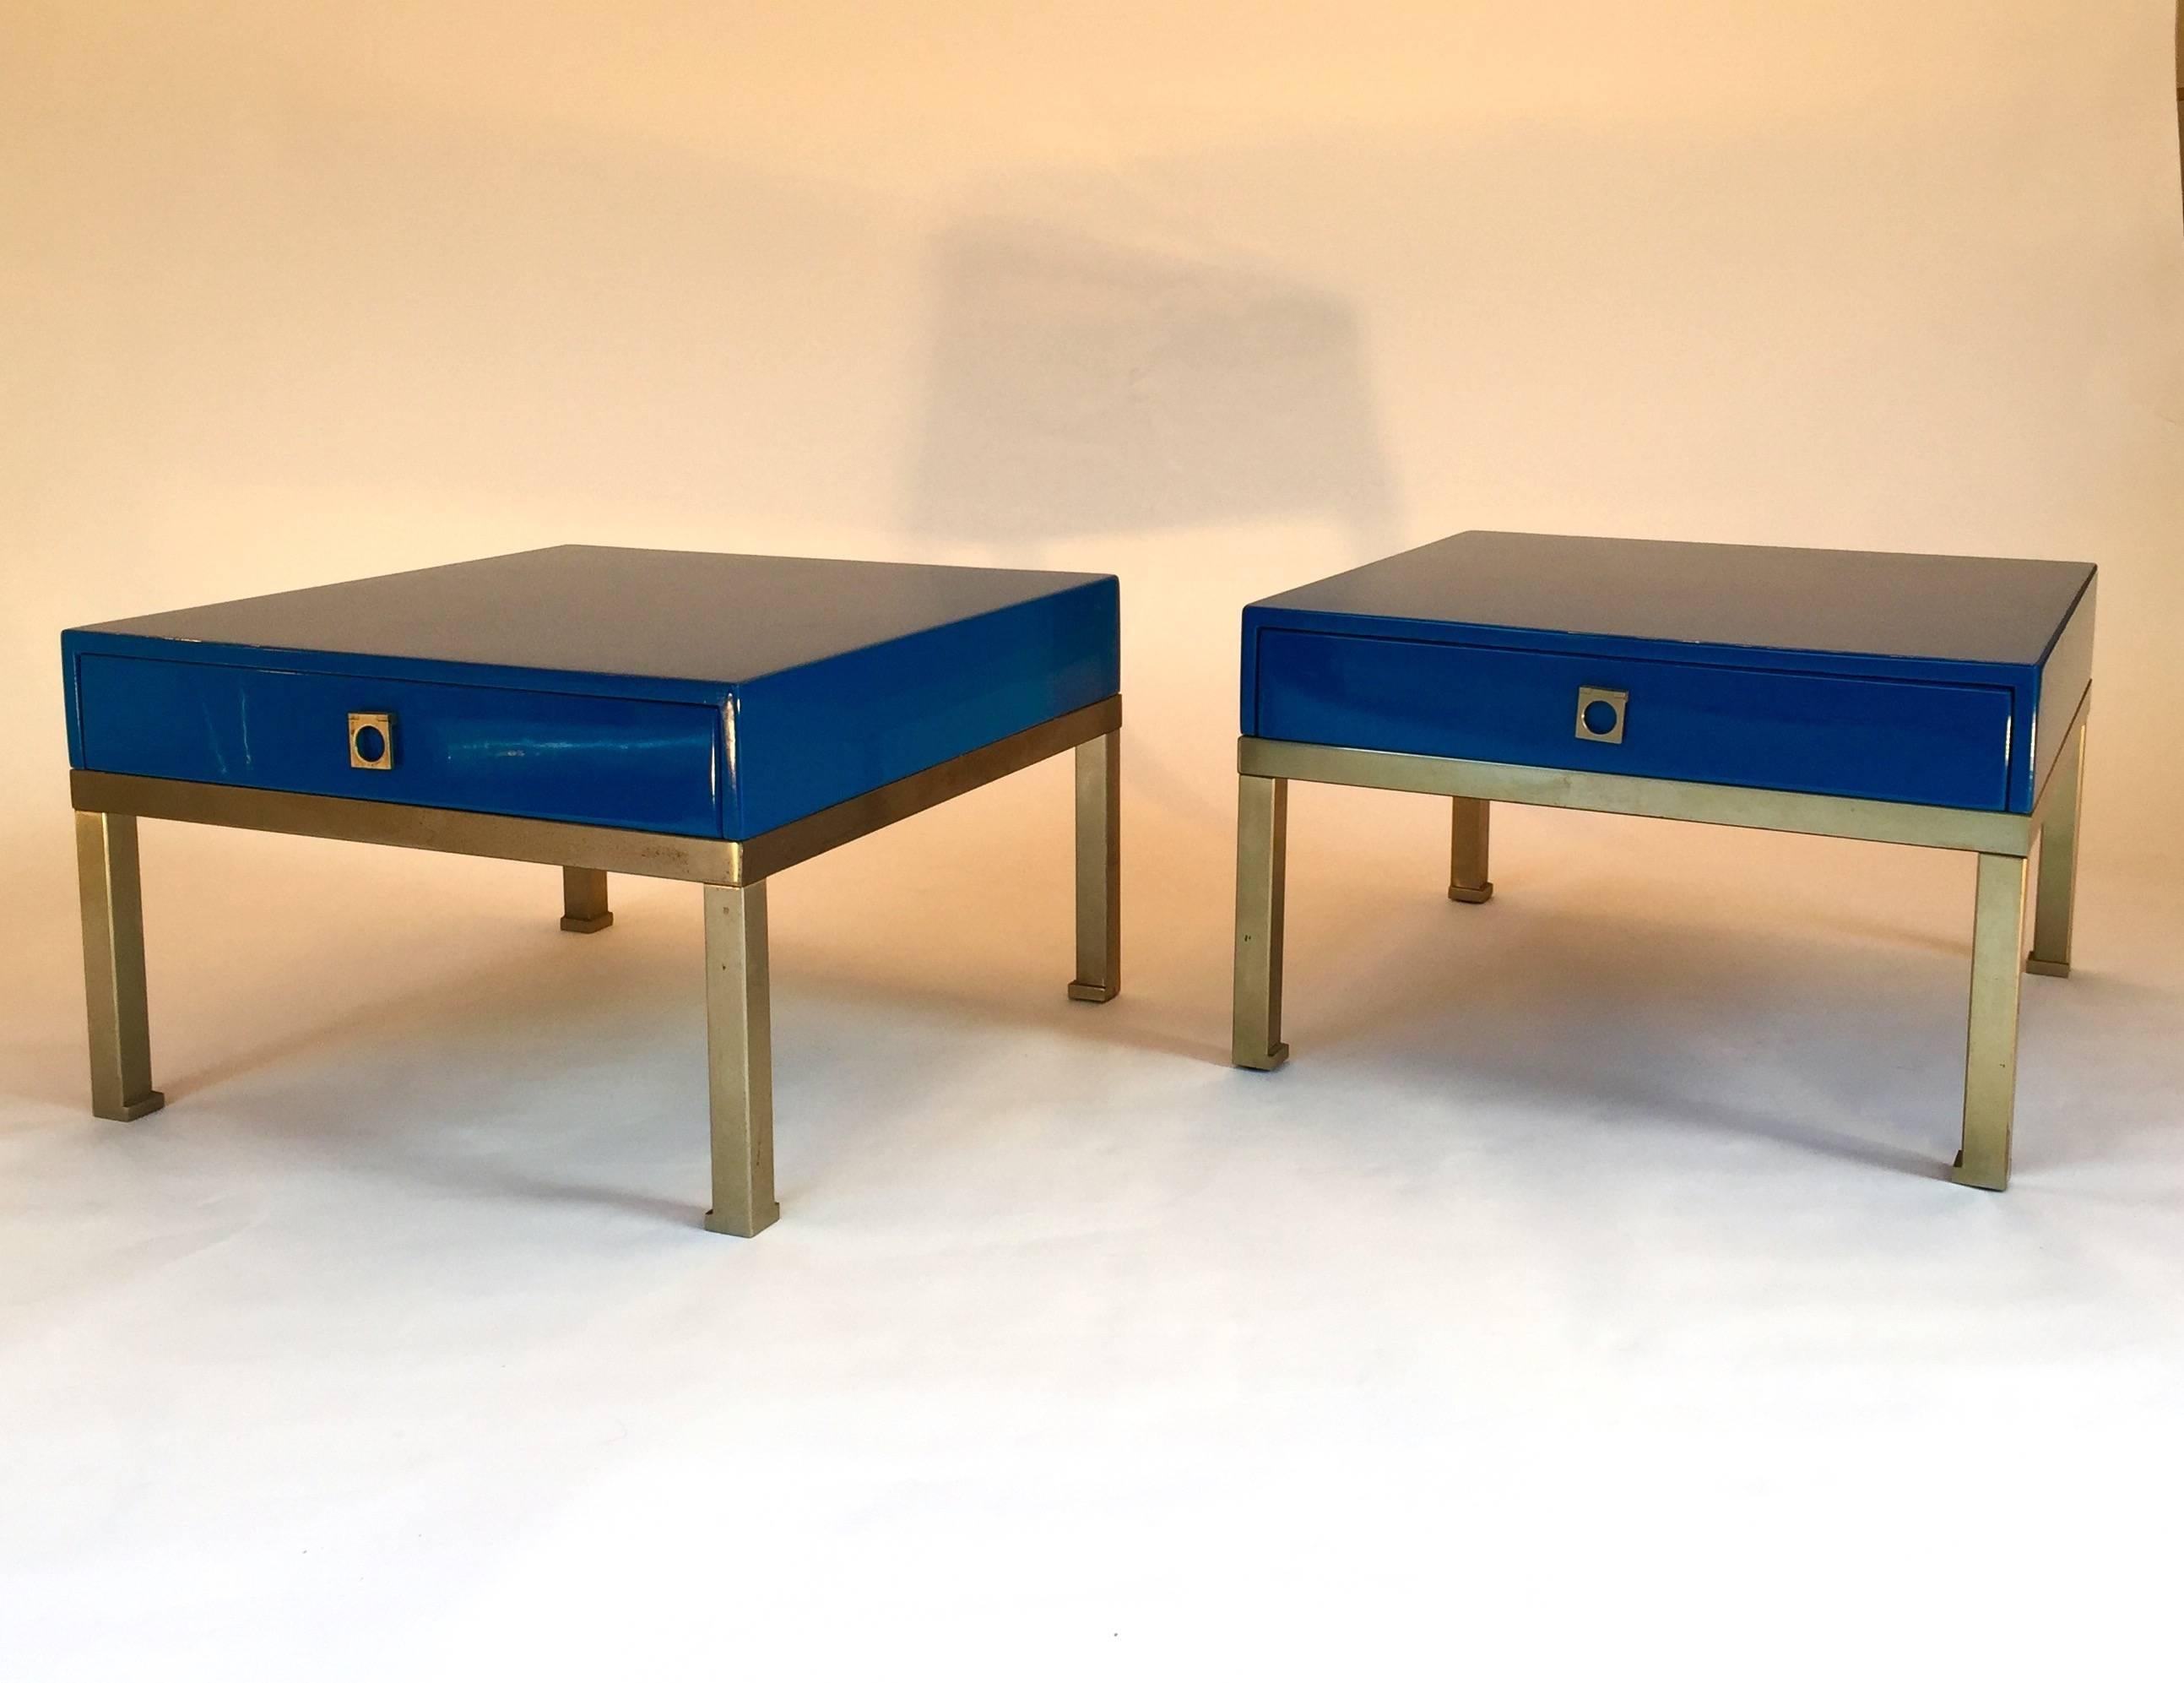 Mid-Century Modern pair of side end tables or nightstands in bleu lacquer by the designer Guy Lefèvre for Maison Jansen. Interior drawers in mahogany wood, nickeled brass feet. Typical model of Lefèvre but in an unusual big size. Guy Lefèvre is